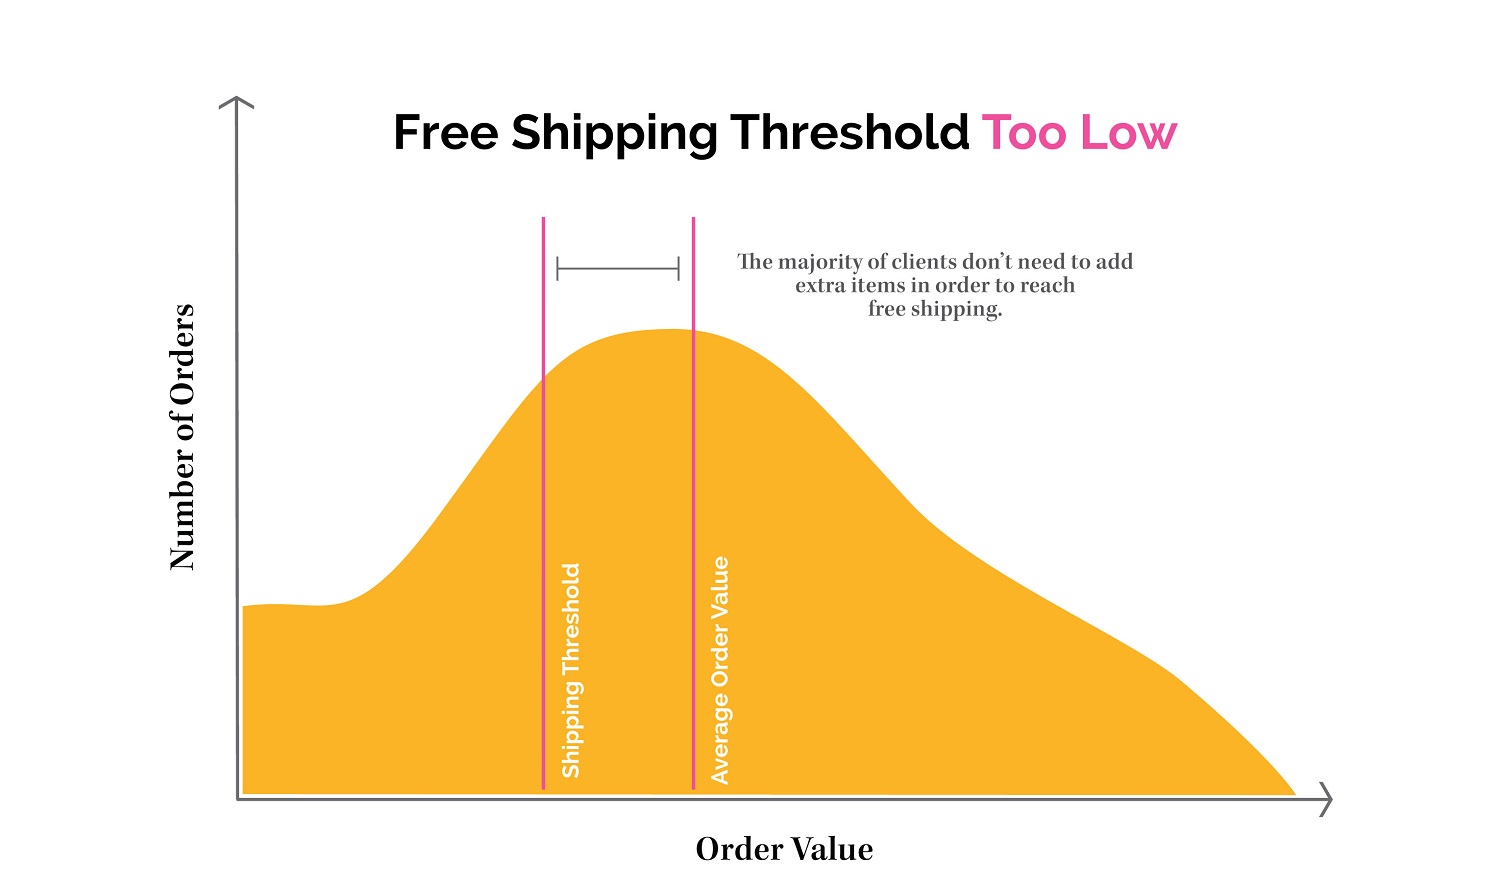 Is your free shipping threshold set too low?